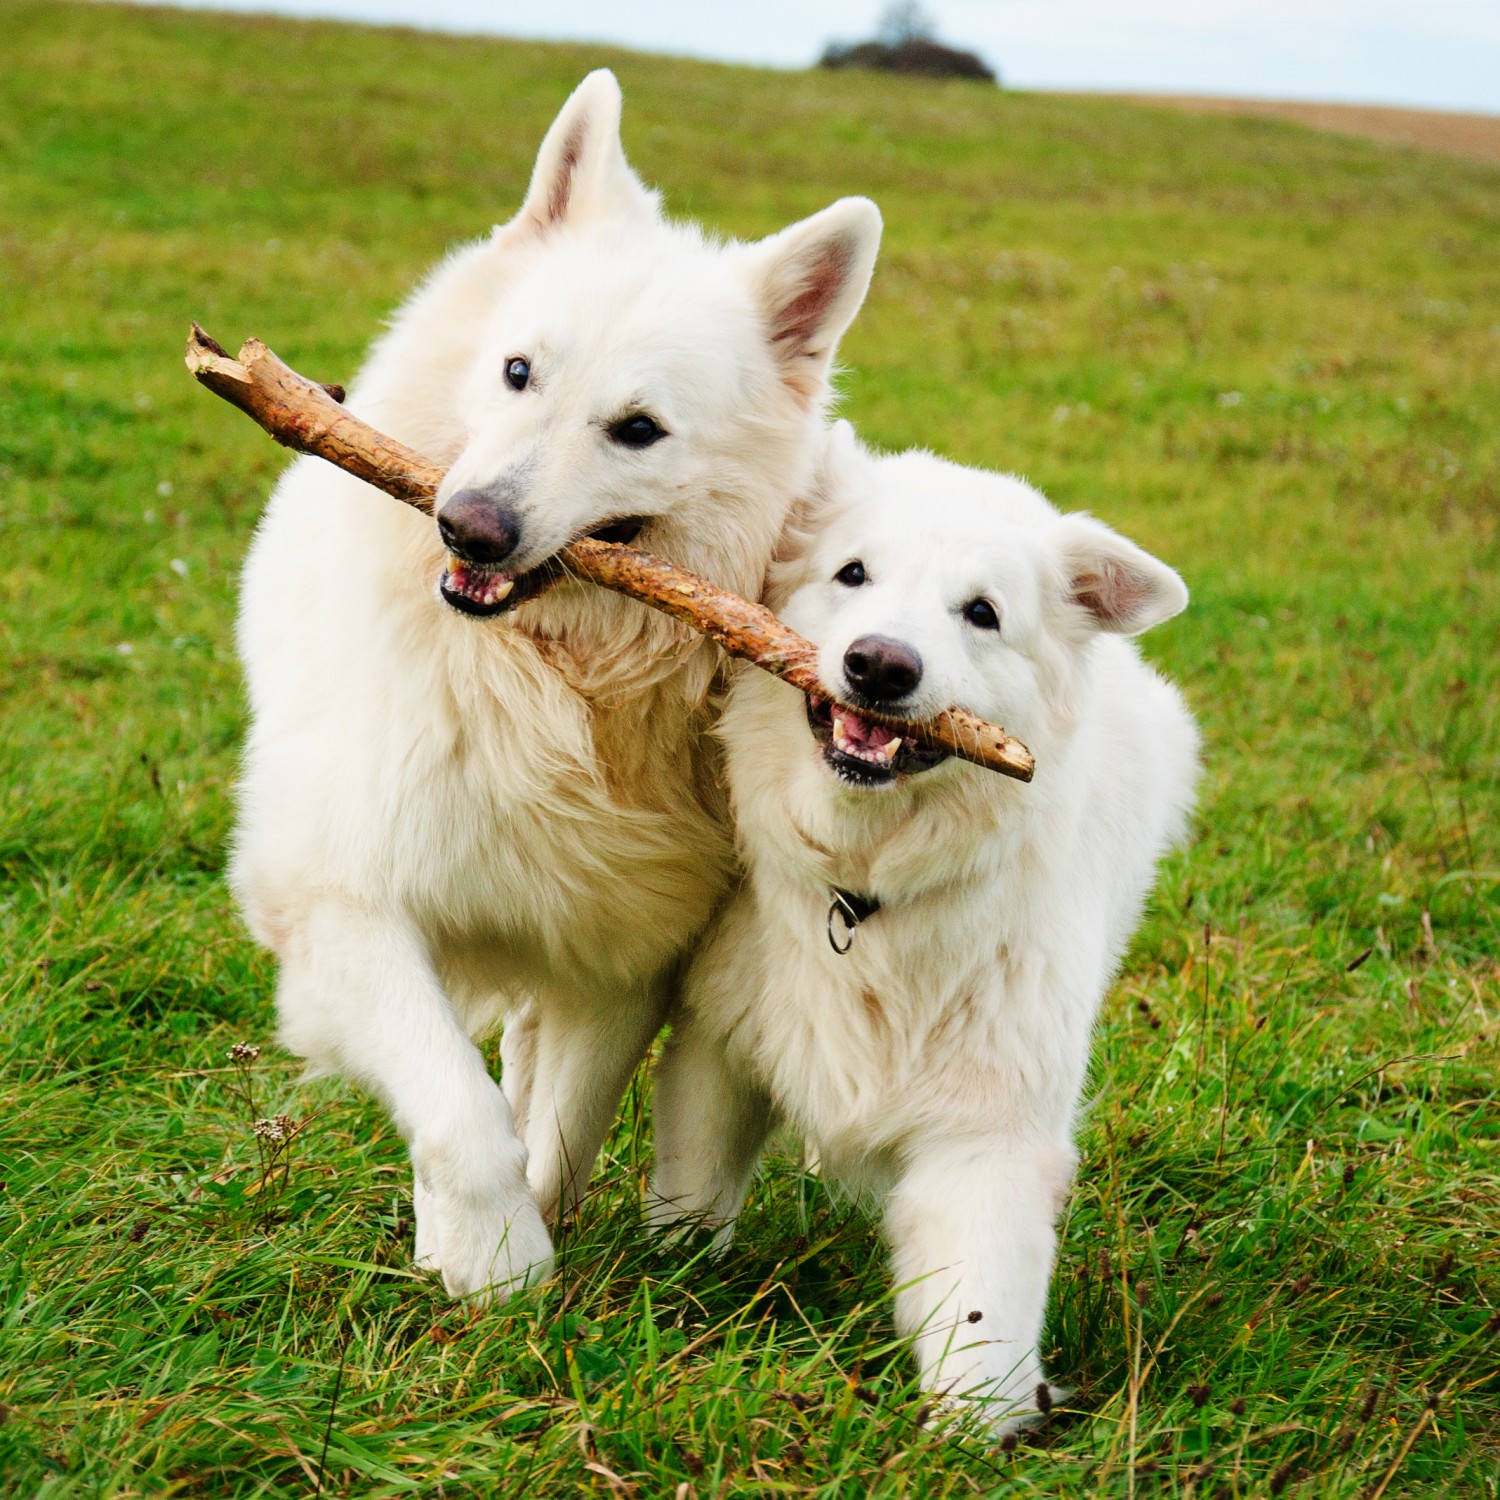 Two dogs playing in the grass with a stick